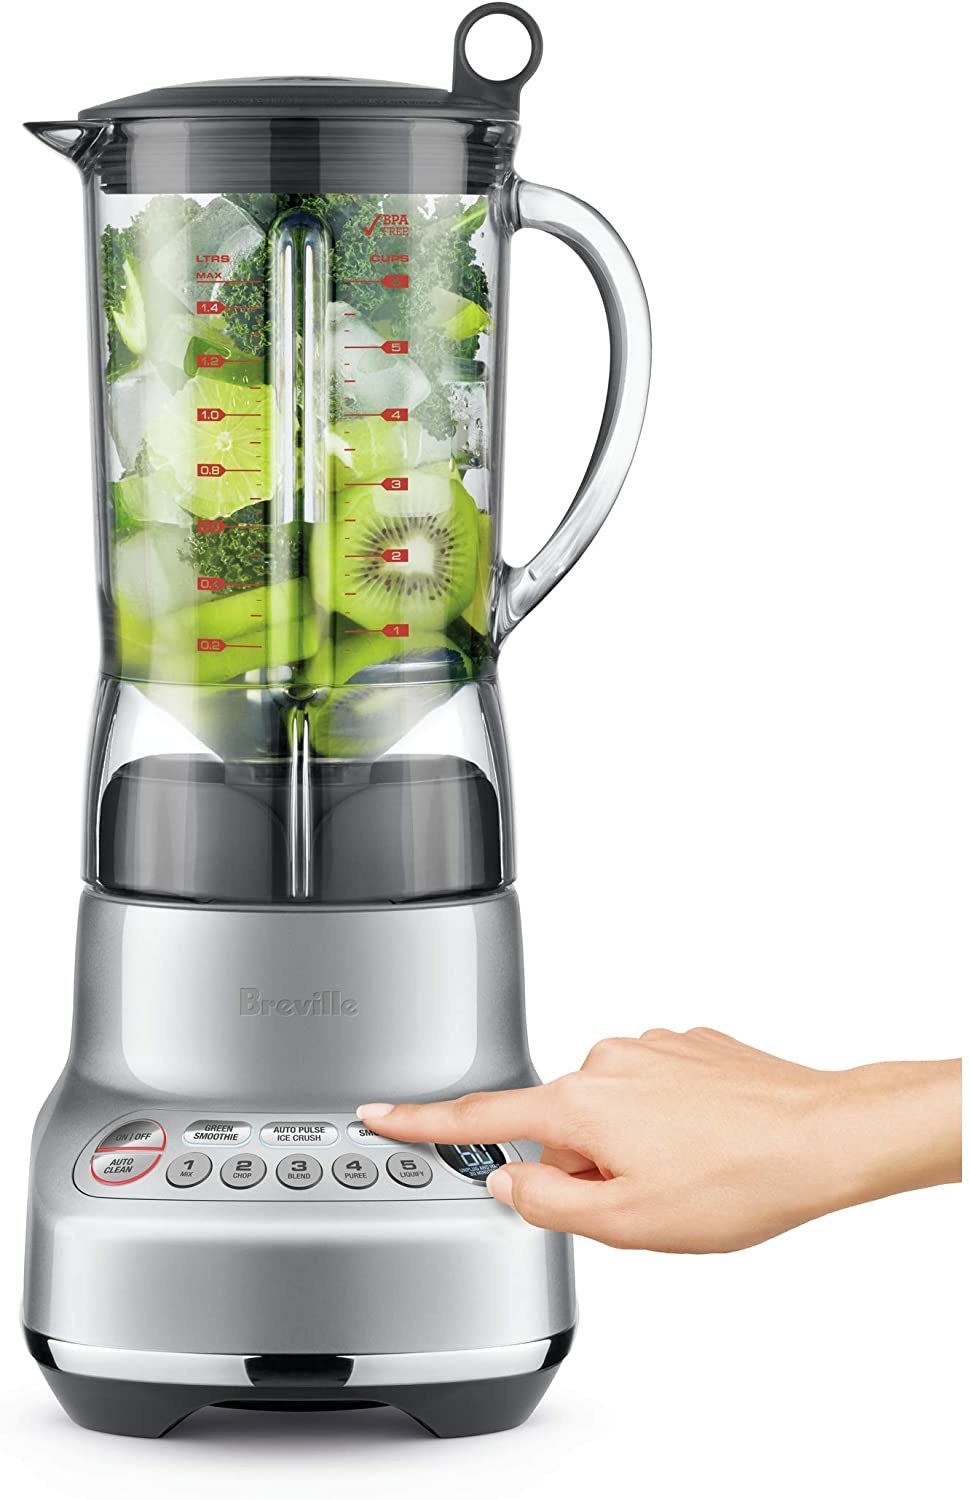 A model&#x27;s hand pressing a button on the metallic silver base of the blender with a jar filled with kiwis